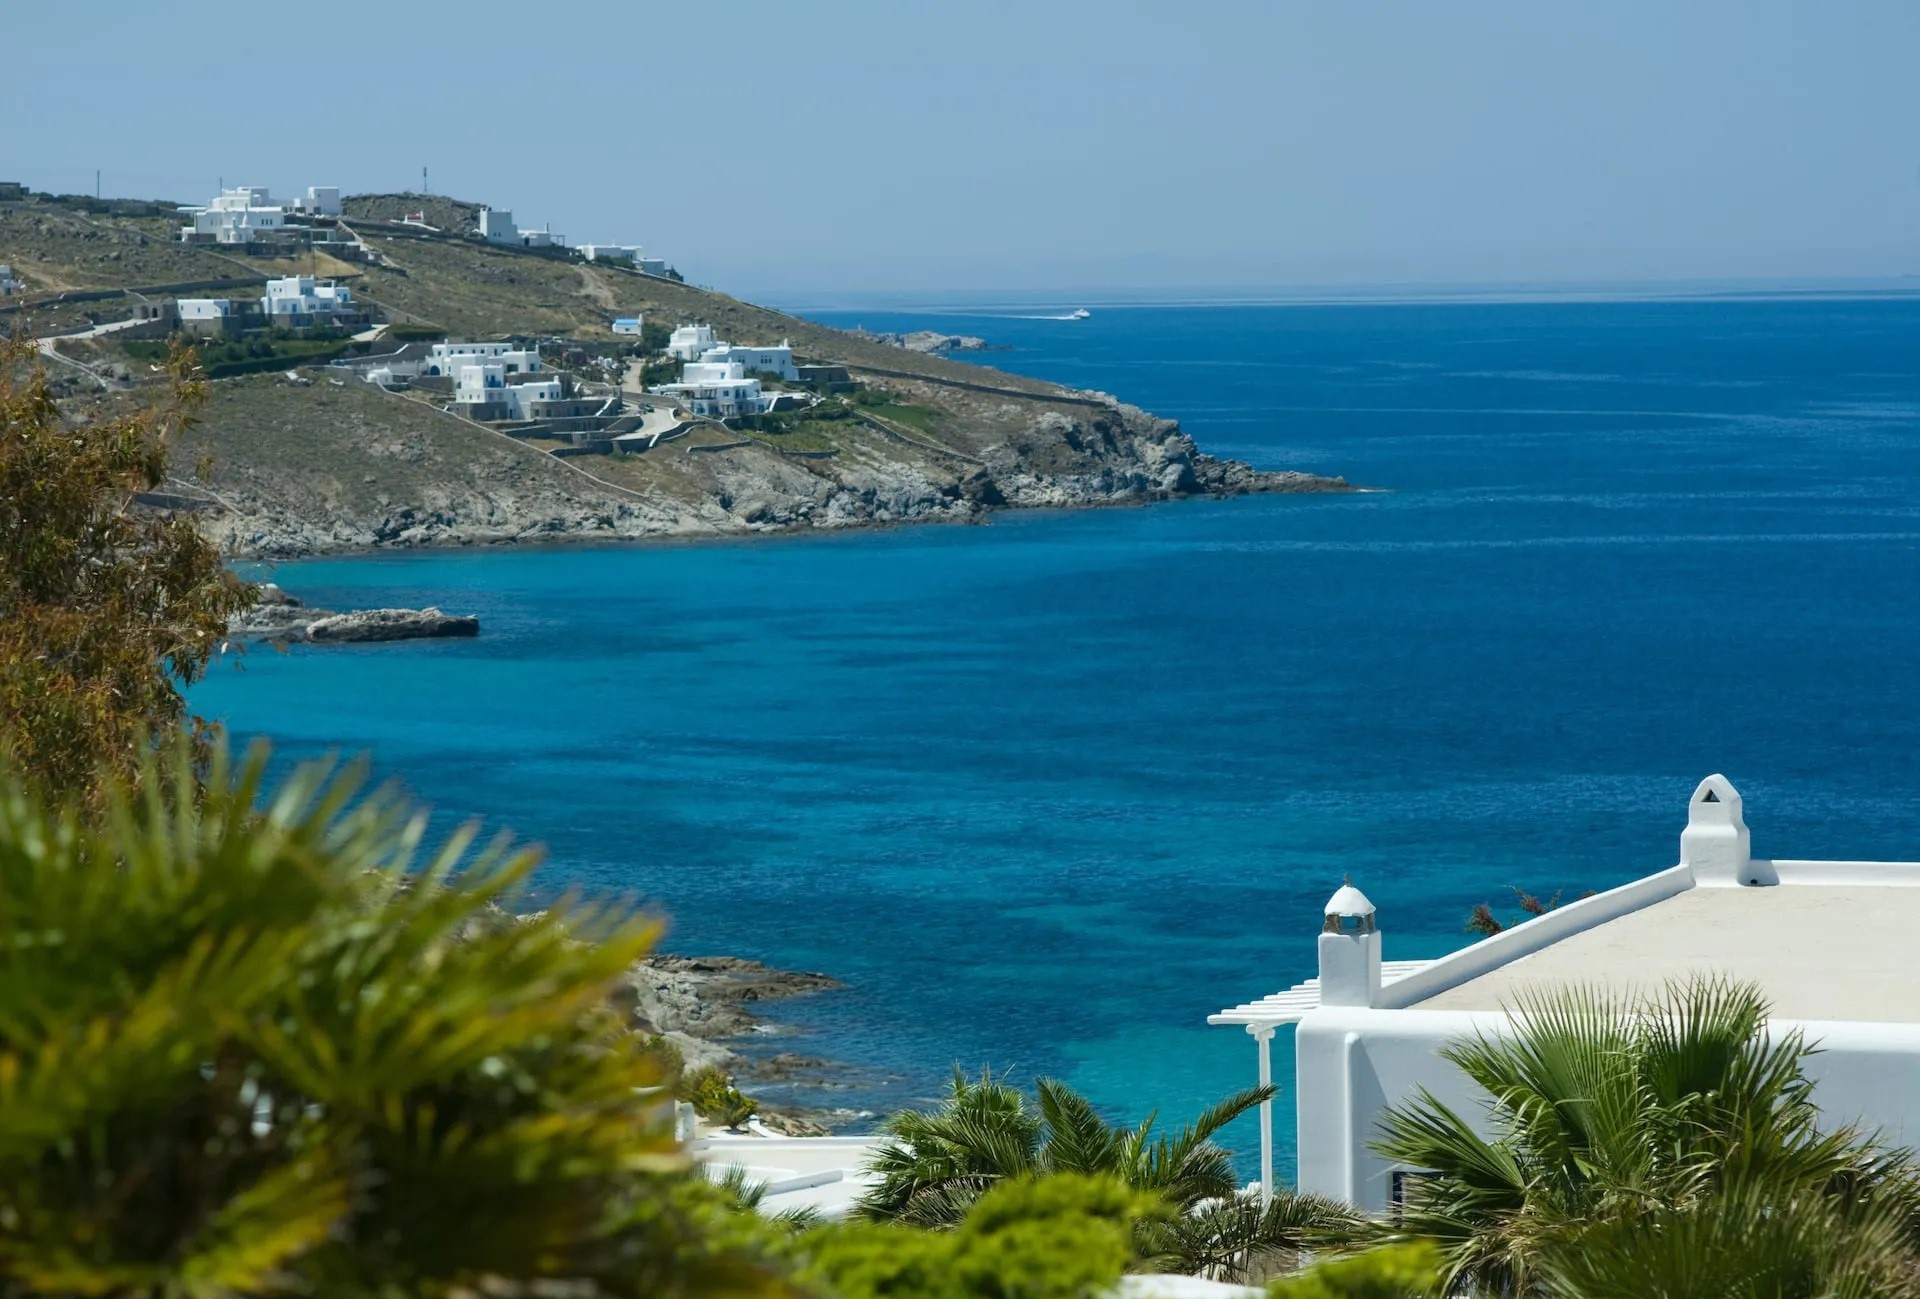 Mykonos Grand Hotel & Resort is a barefoot luxury hotel with a grand tradition